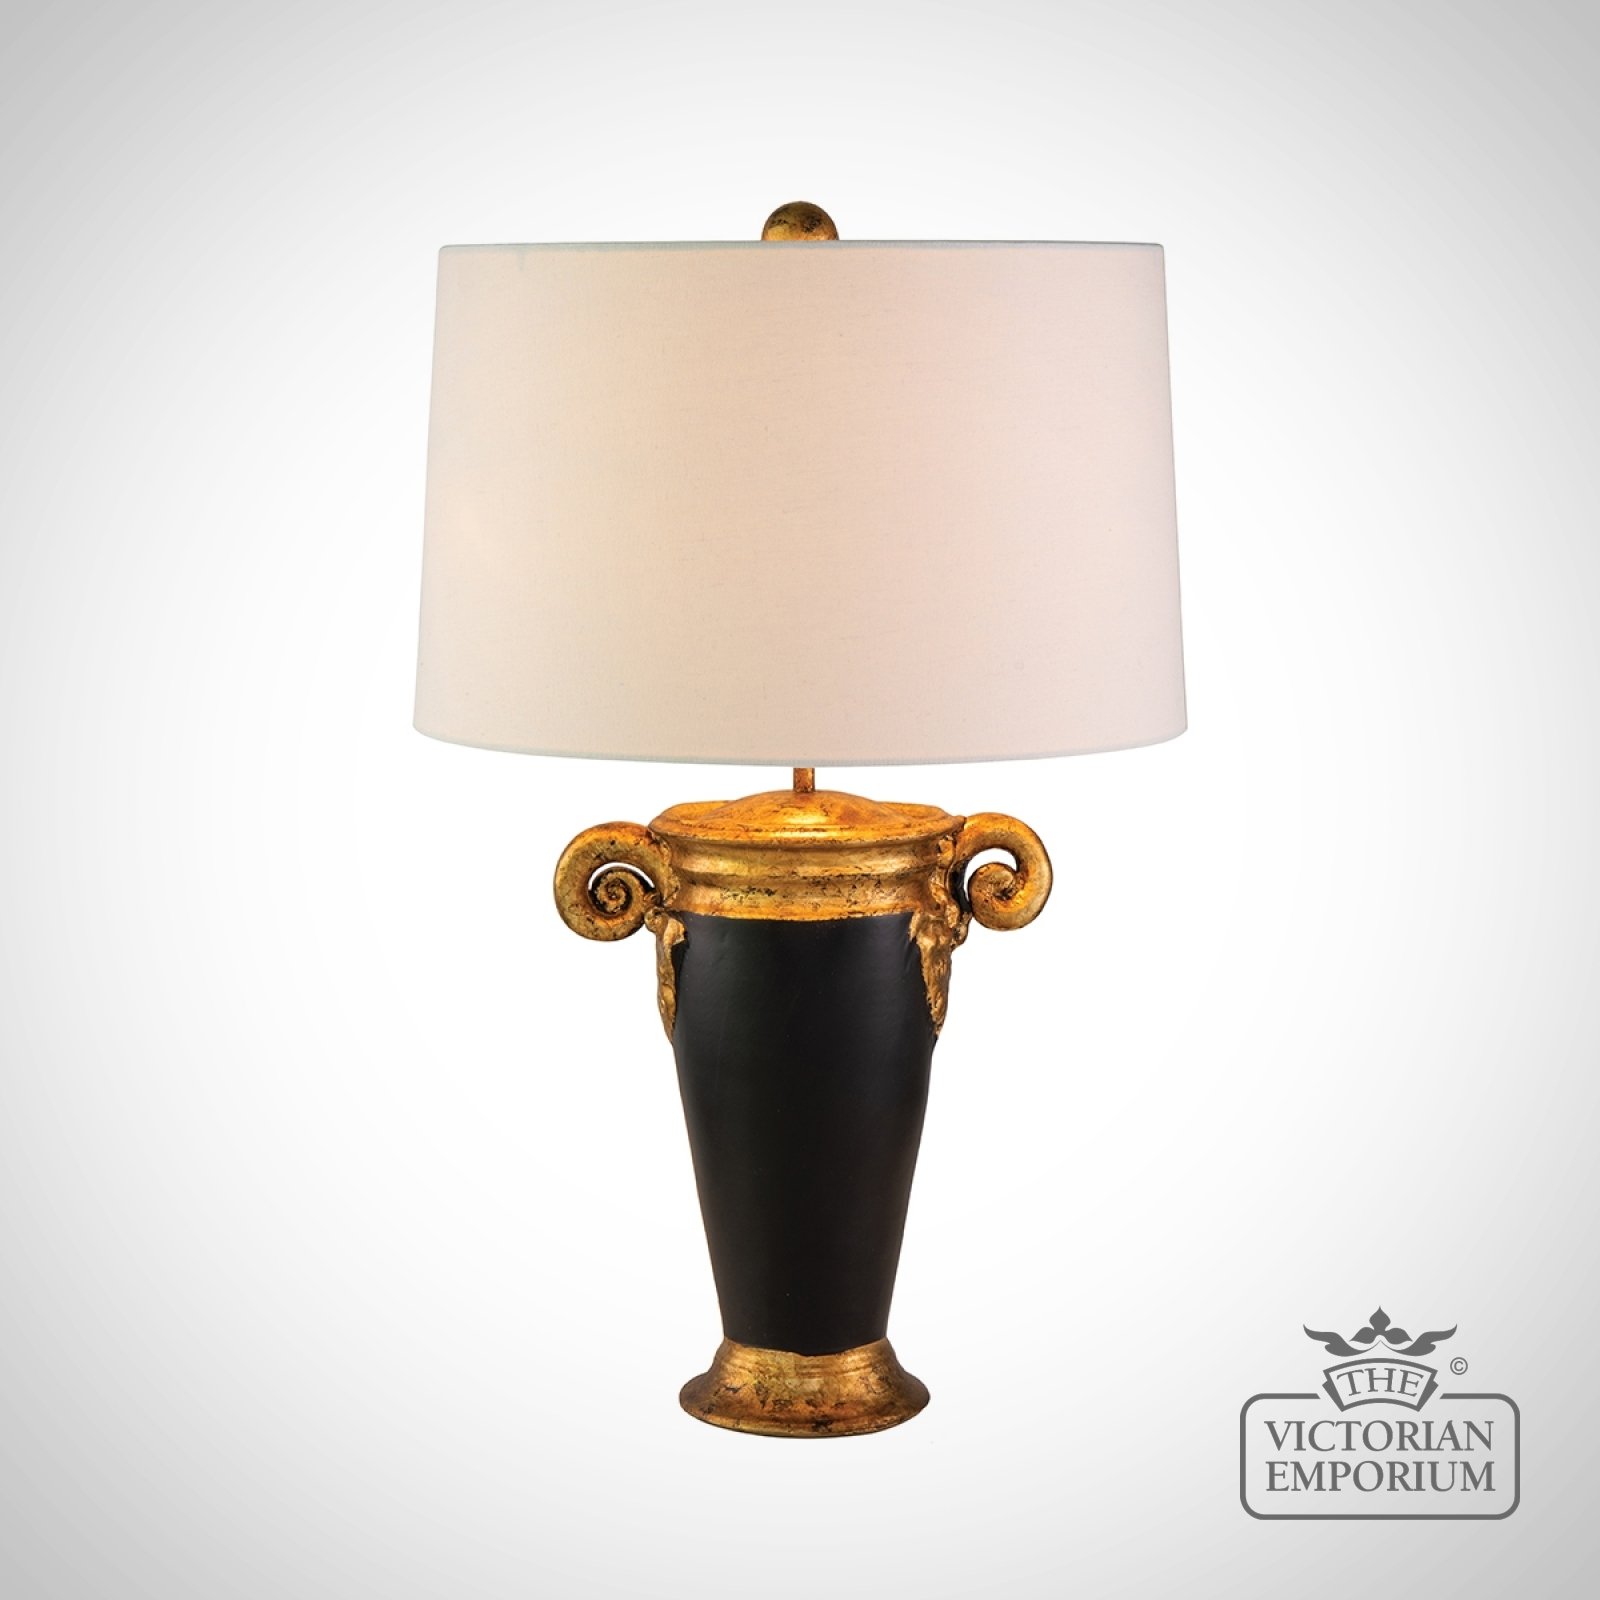 Gallier Table Lamp